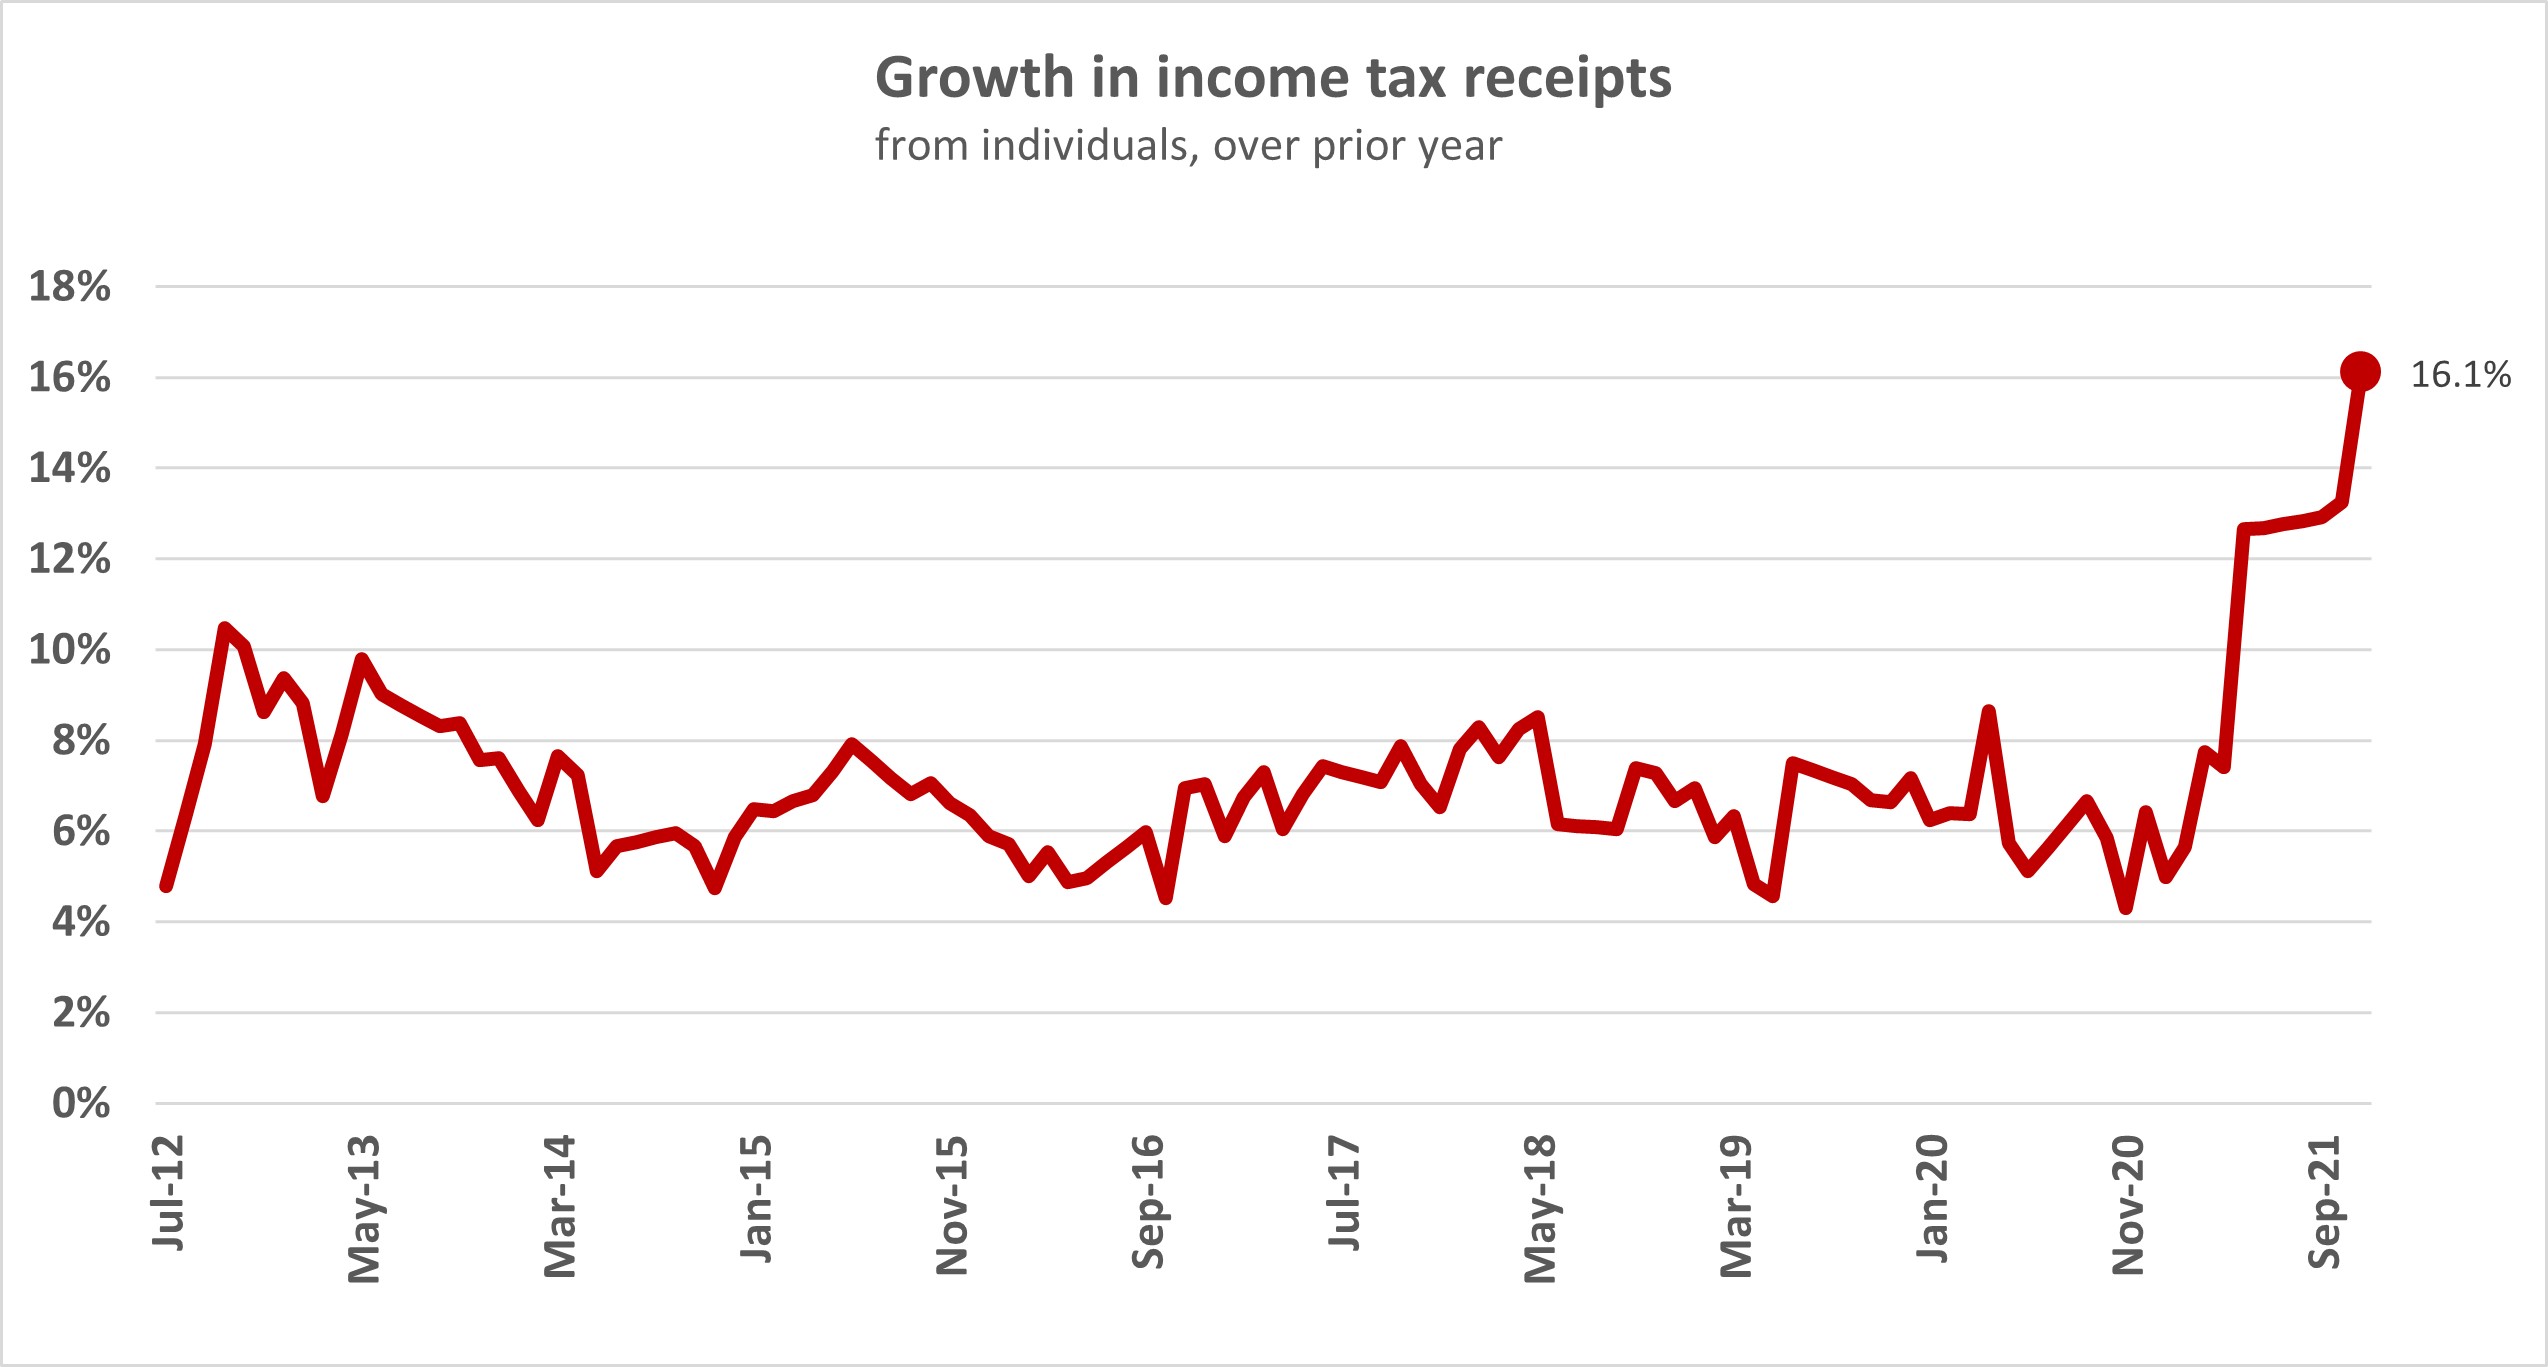 income-taxes-paid-by-individuals-eclipse-previous-high-interest-co-nz